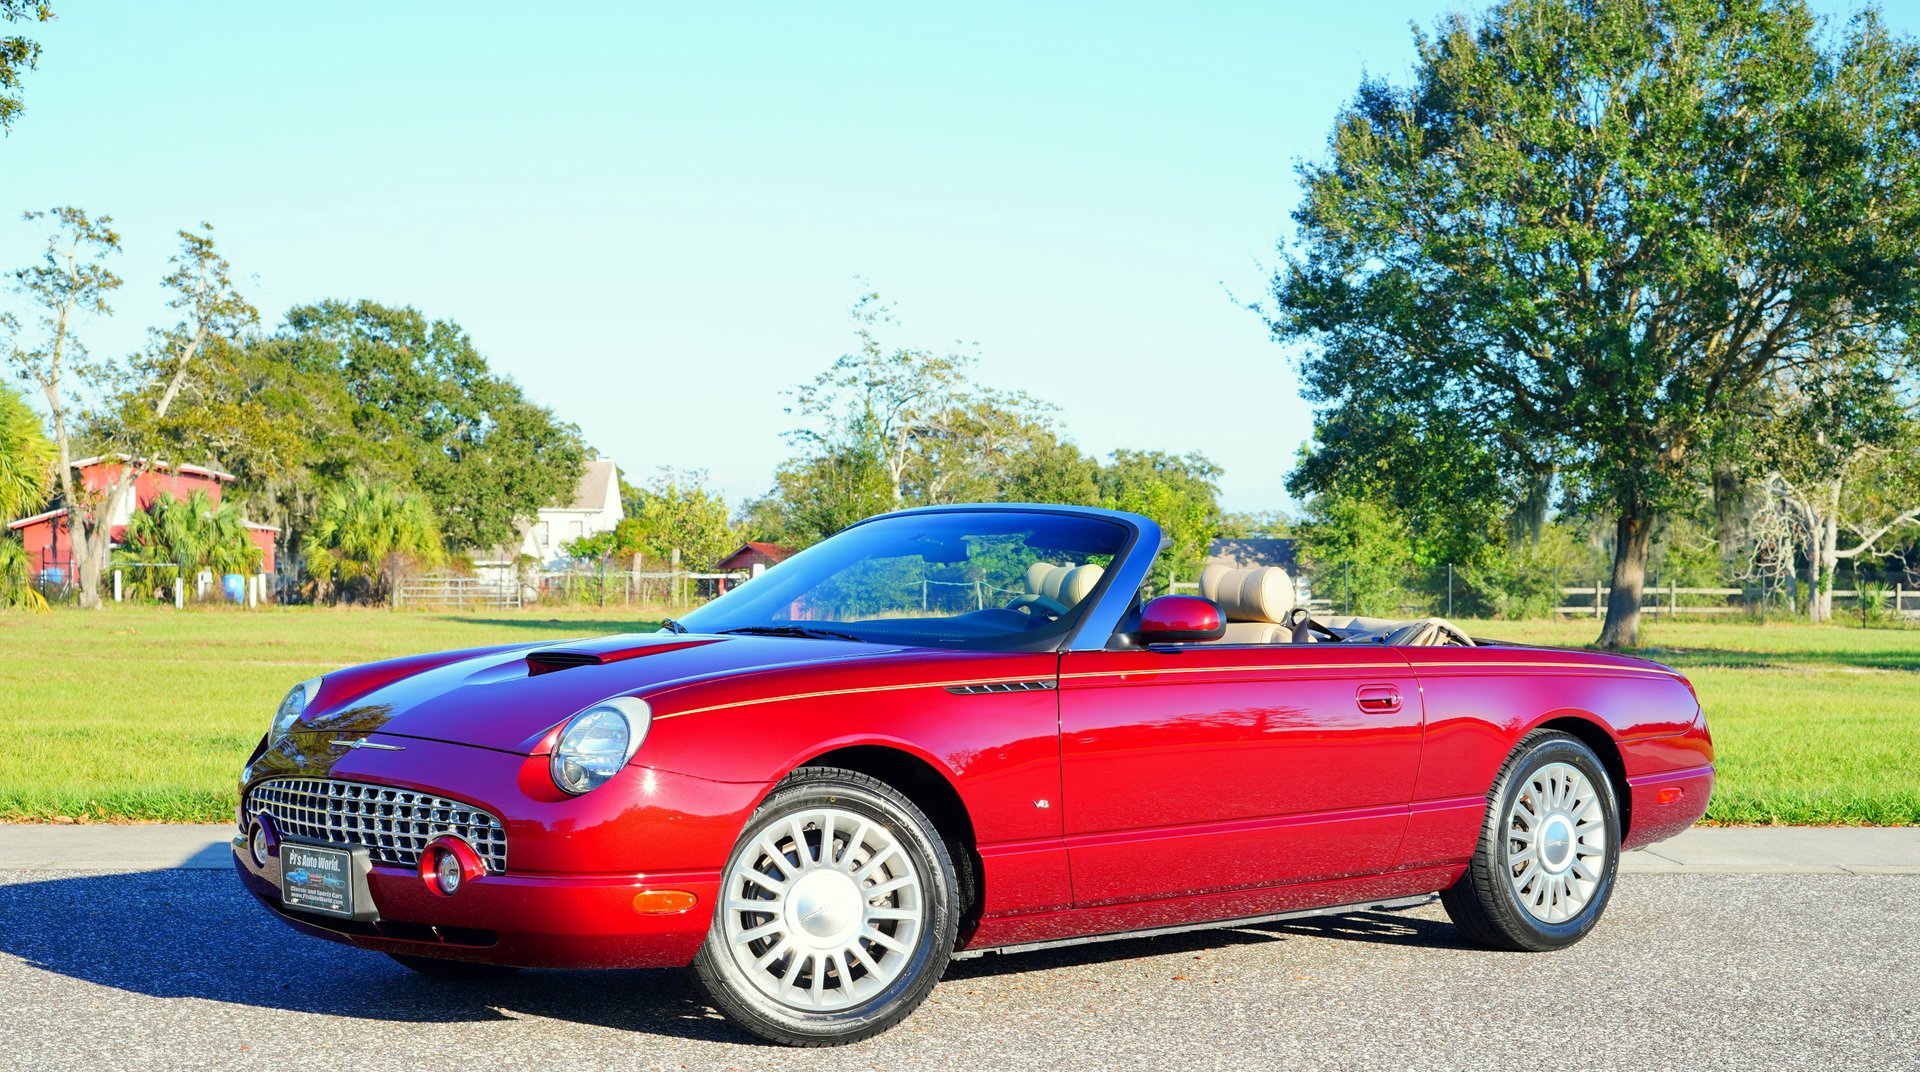 2004 ford thunderbird 2dr convertible deluxe